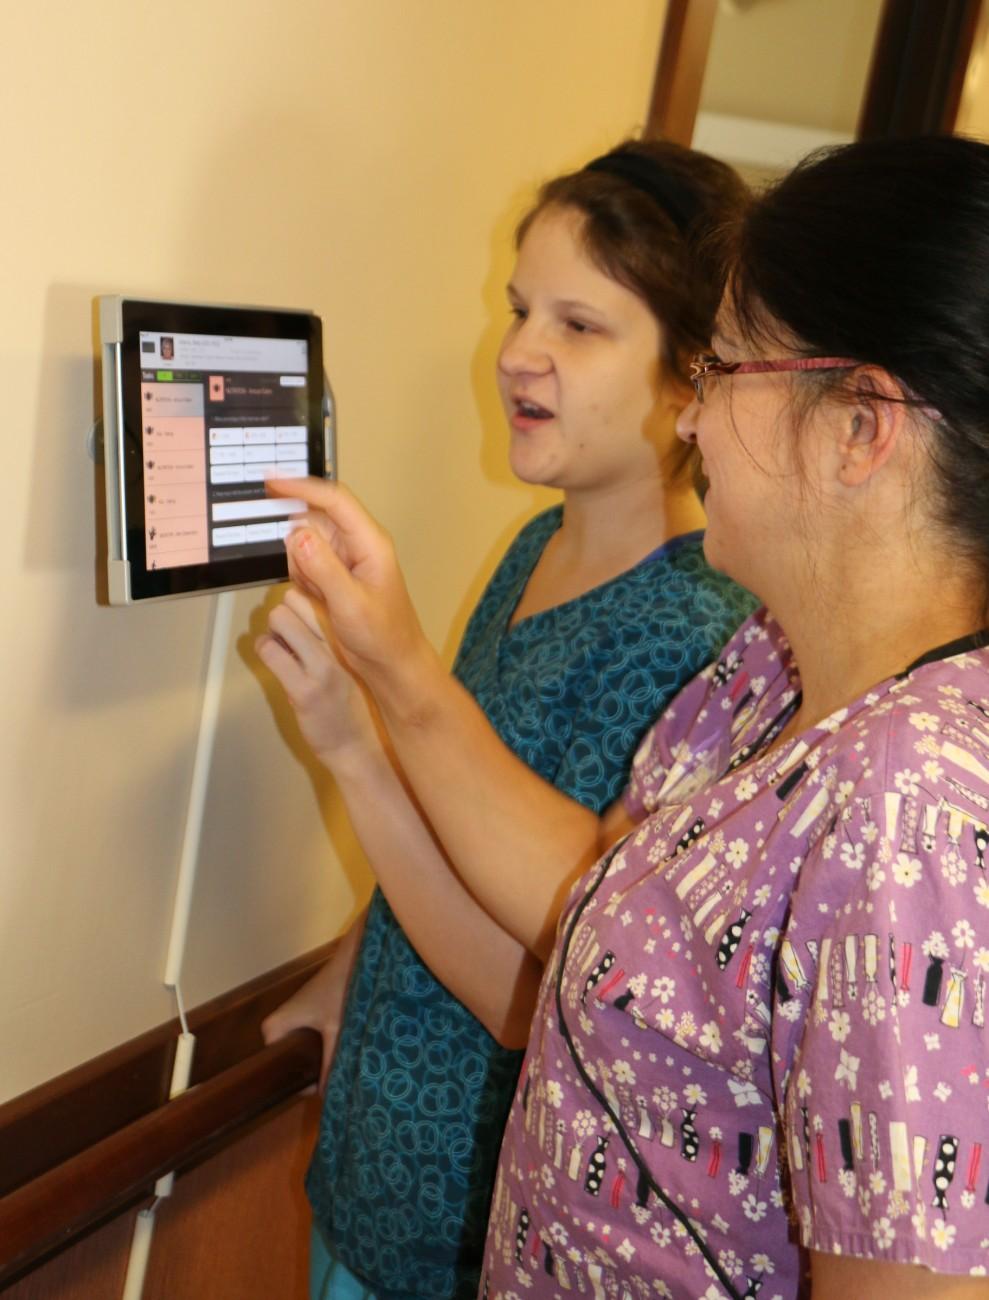 September 2014 RESIDENT NEWS New Technology Better Resident Care On July 1st, Pine Haven began the transition to Electronic Medical Records (EMR) to help provide improved care for all residents.